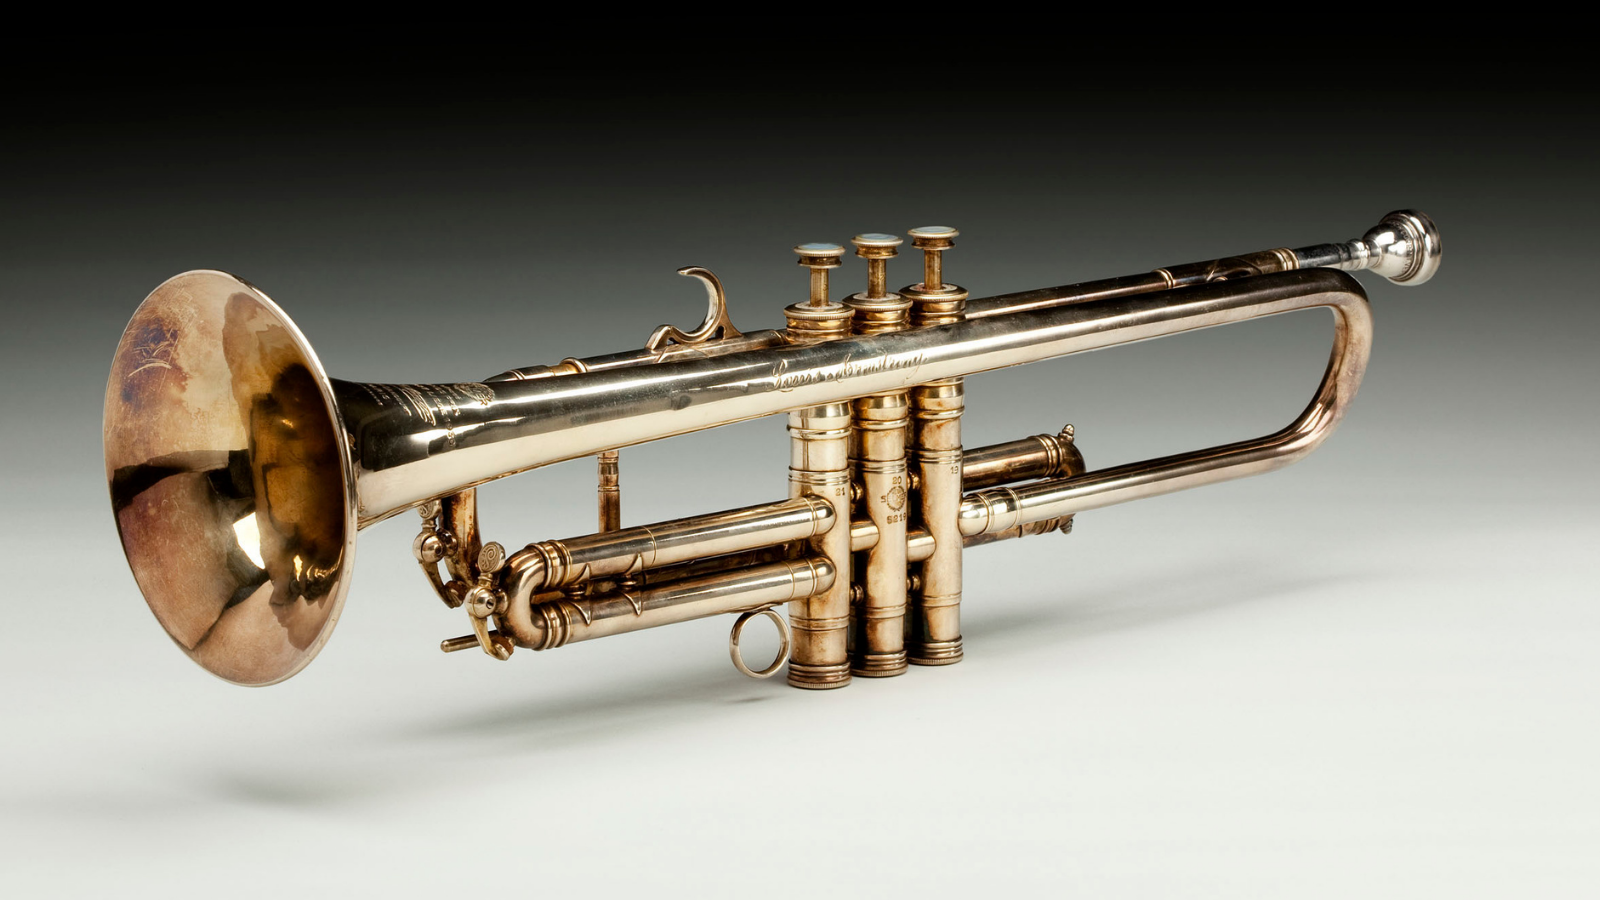 One-of-a-kind brass-and-gold trumpet owned and played by Louis Armstrong circa 1946, photographed on October 19, 2015. (Photo courtesy of the National Museum of African American History and Culture)